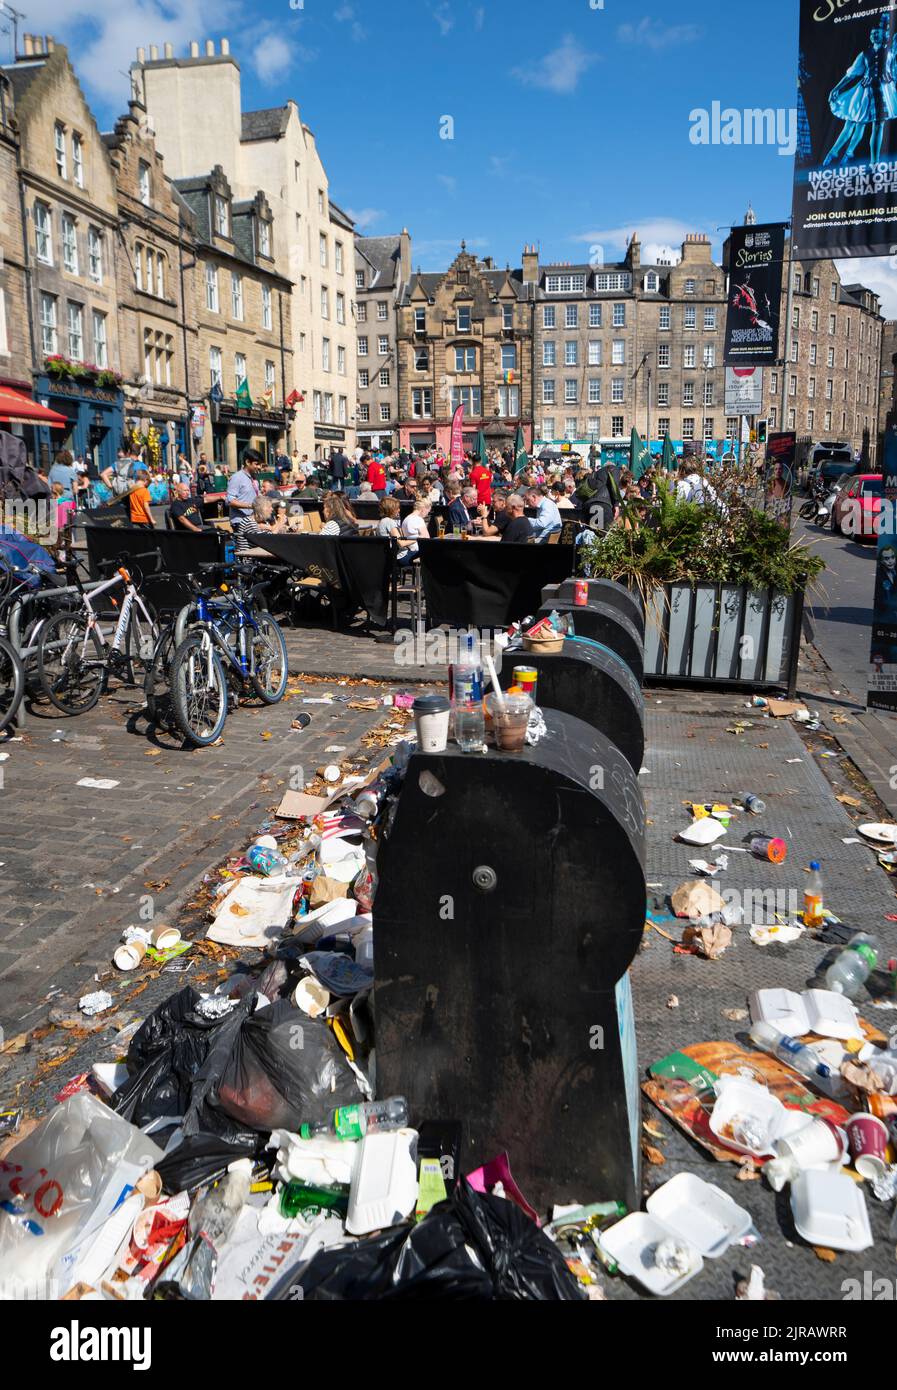 Edinburgh, Scotland, UK. 23rd  August 2022. Rubbish is seen piled on the streets of Edinburgh city centre on day six of a 12 day strike by city refuse collectors. Pic; Outdoor eating areas next to overflowing rubbish bins in the Grassmarket.  Iain Masterton/Alamy Live News Stock Photo